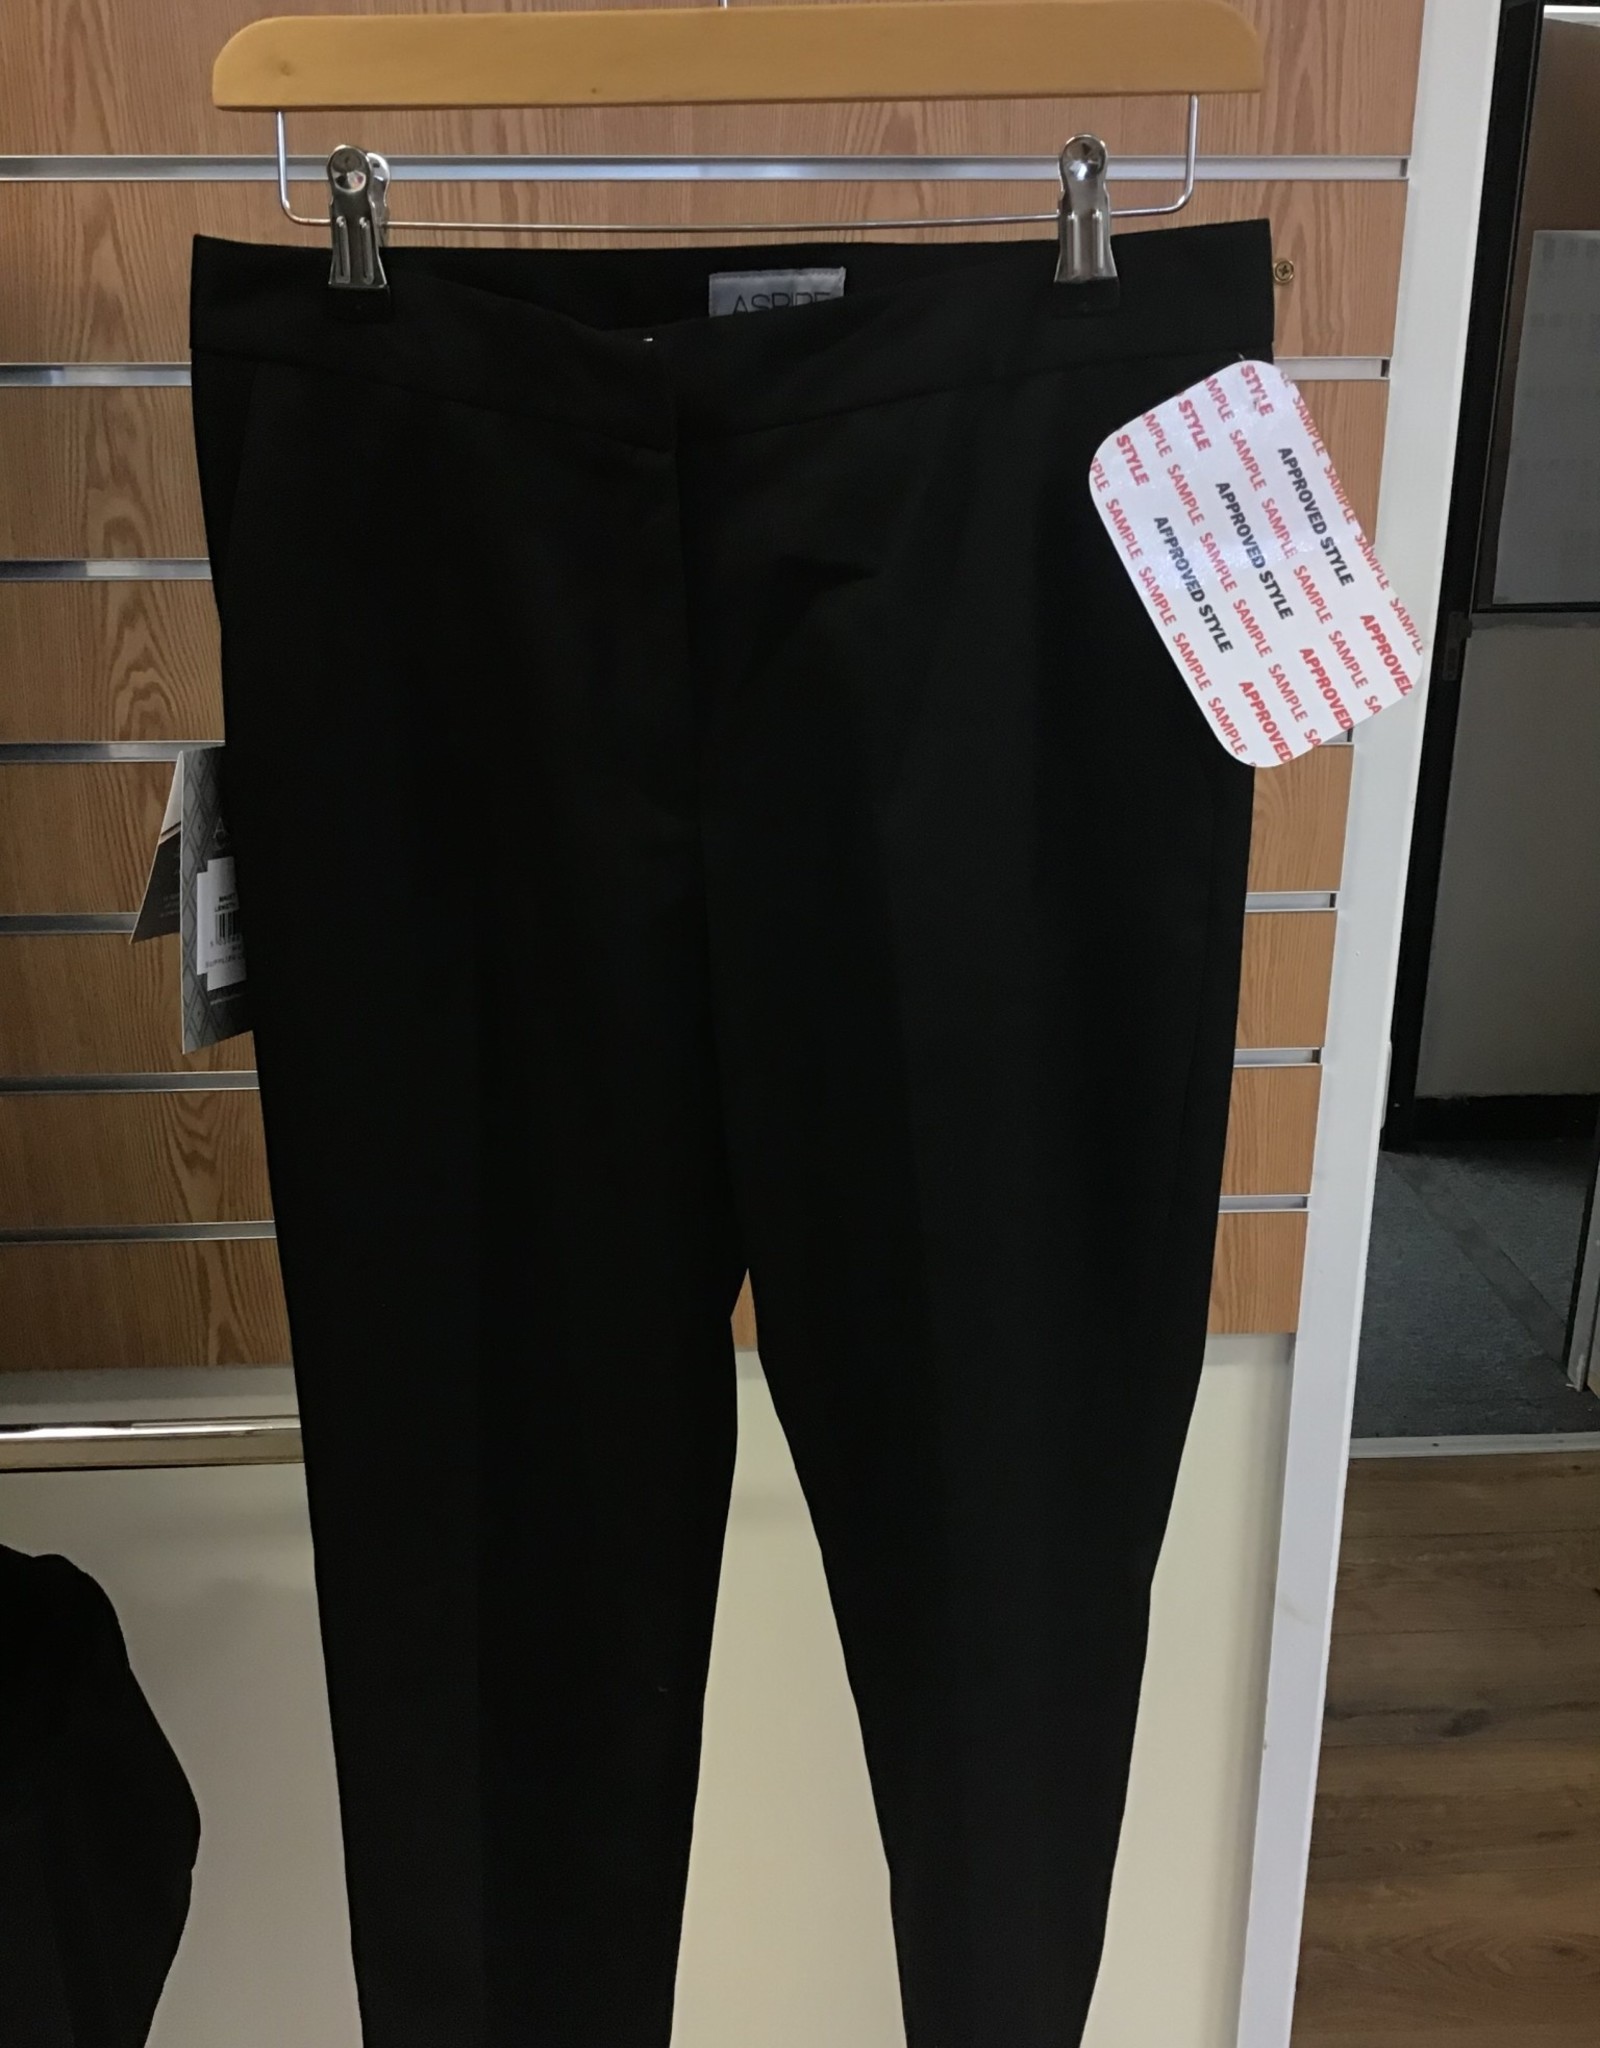 Buy Black Slim Fit Jersey Trousers from the Pineapple online store